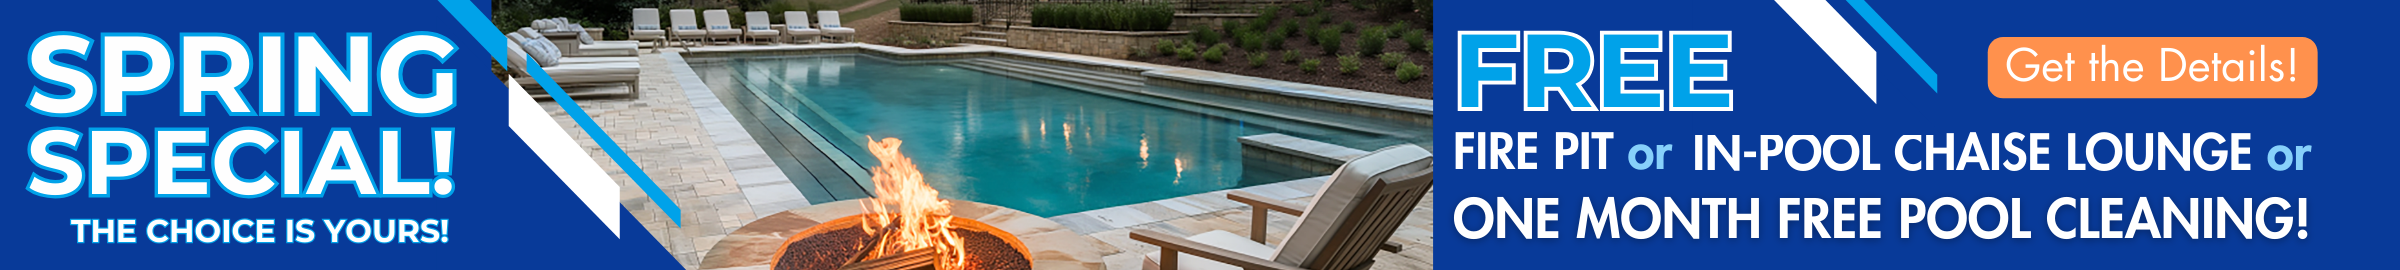 Spring Special! Free fire pit OR in-pool chaise lounge OR 1 month free pool cleaning